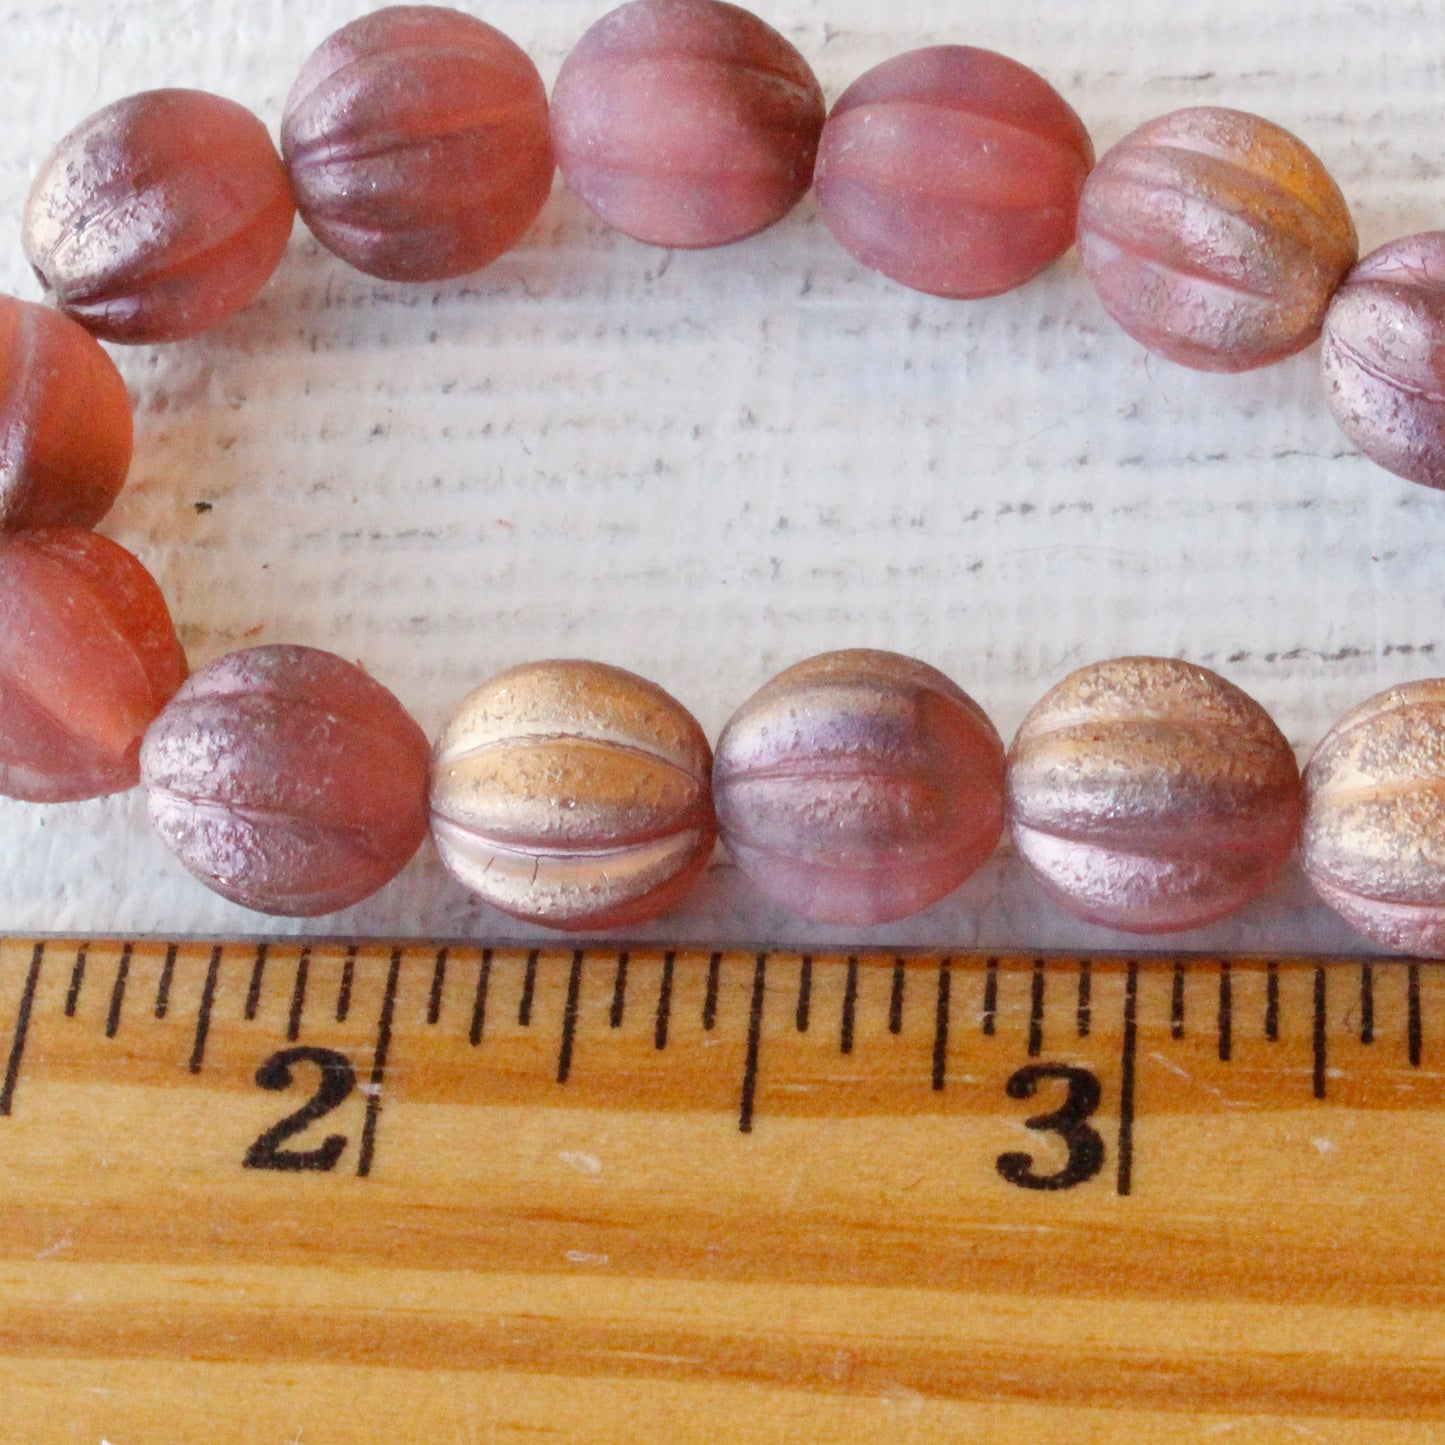 10mm Melon Bead - Etched Matte Dusty Rose with Copper - 15 Beads